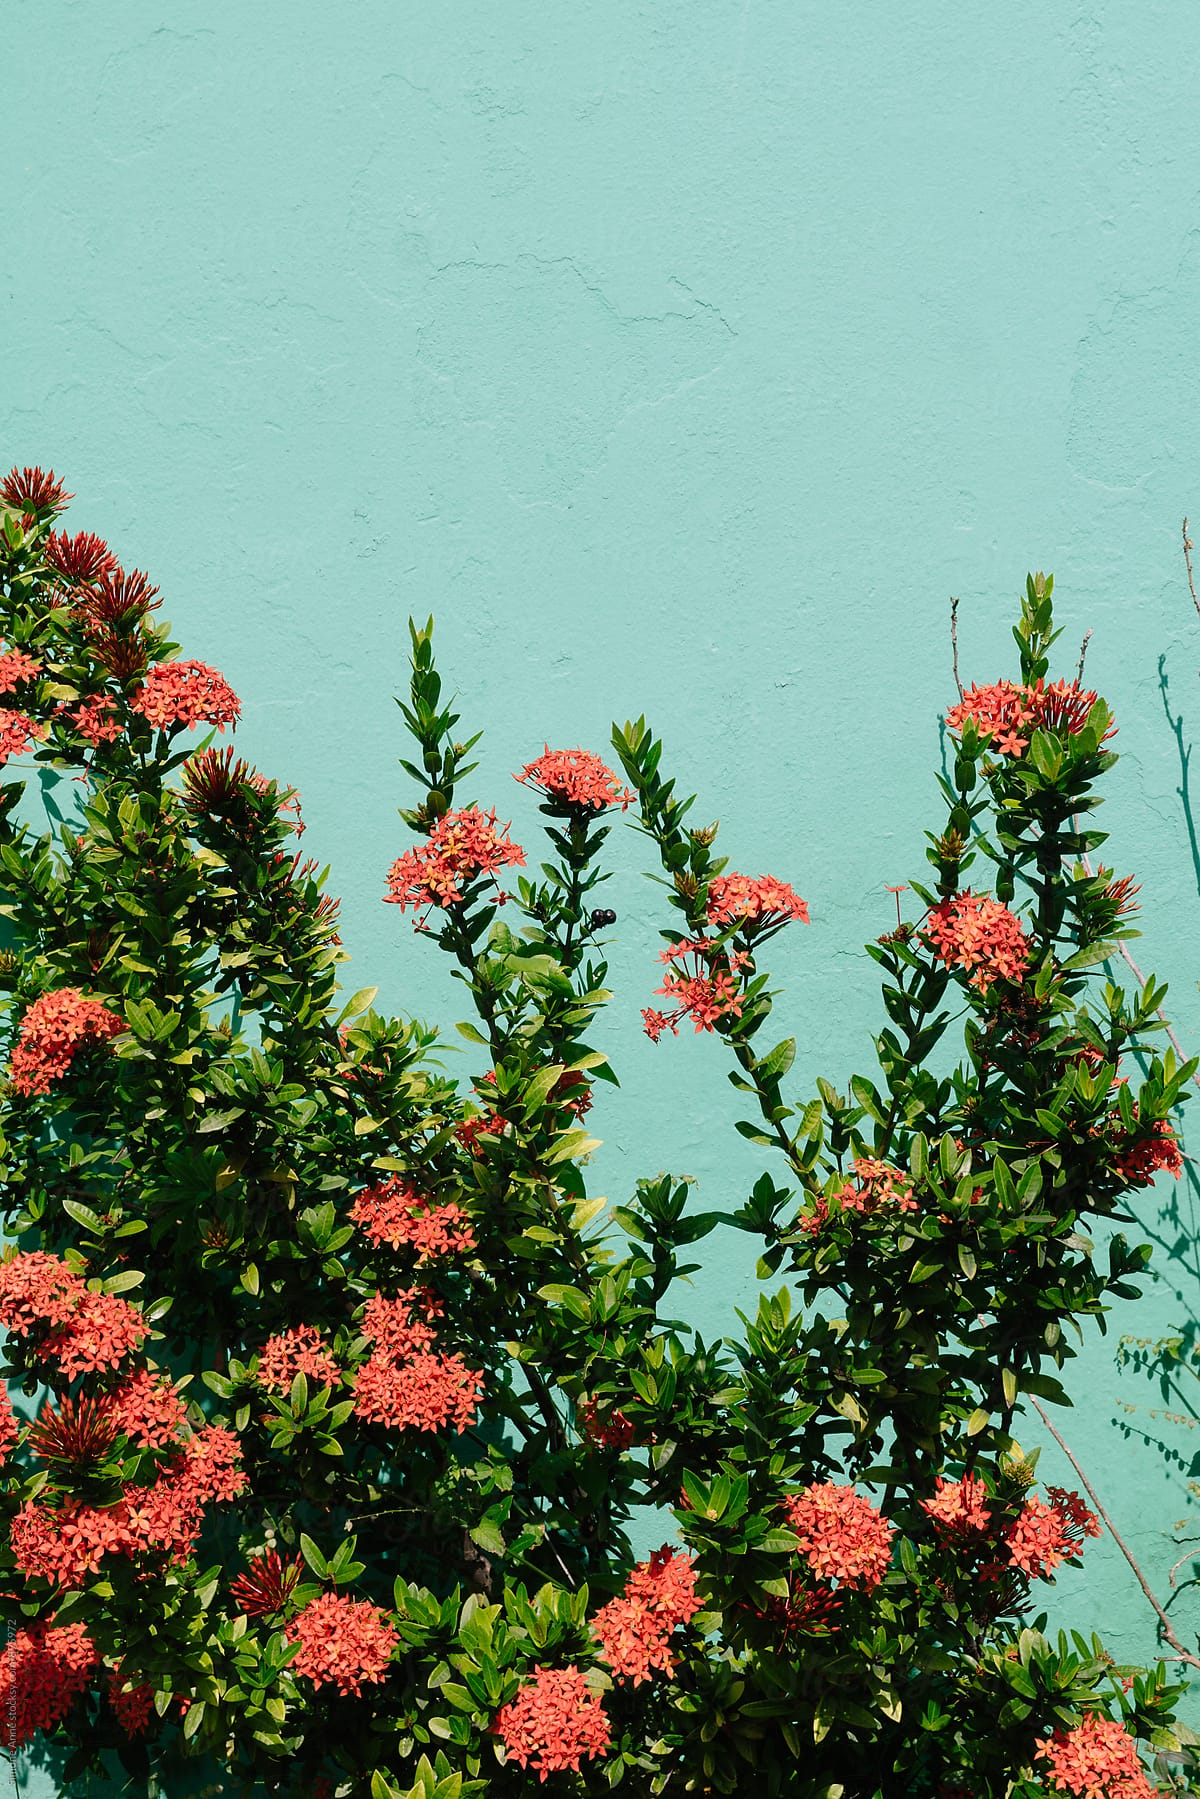 Orange flowers against a teal background